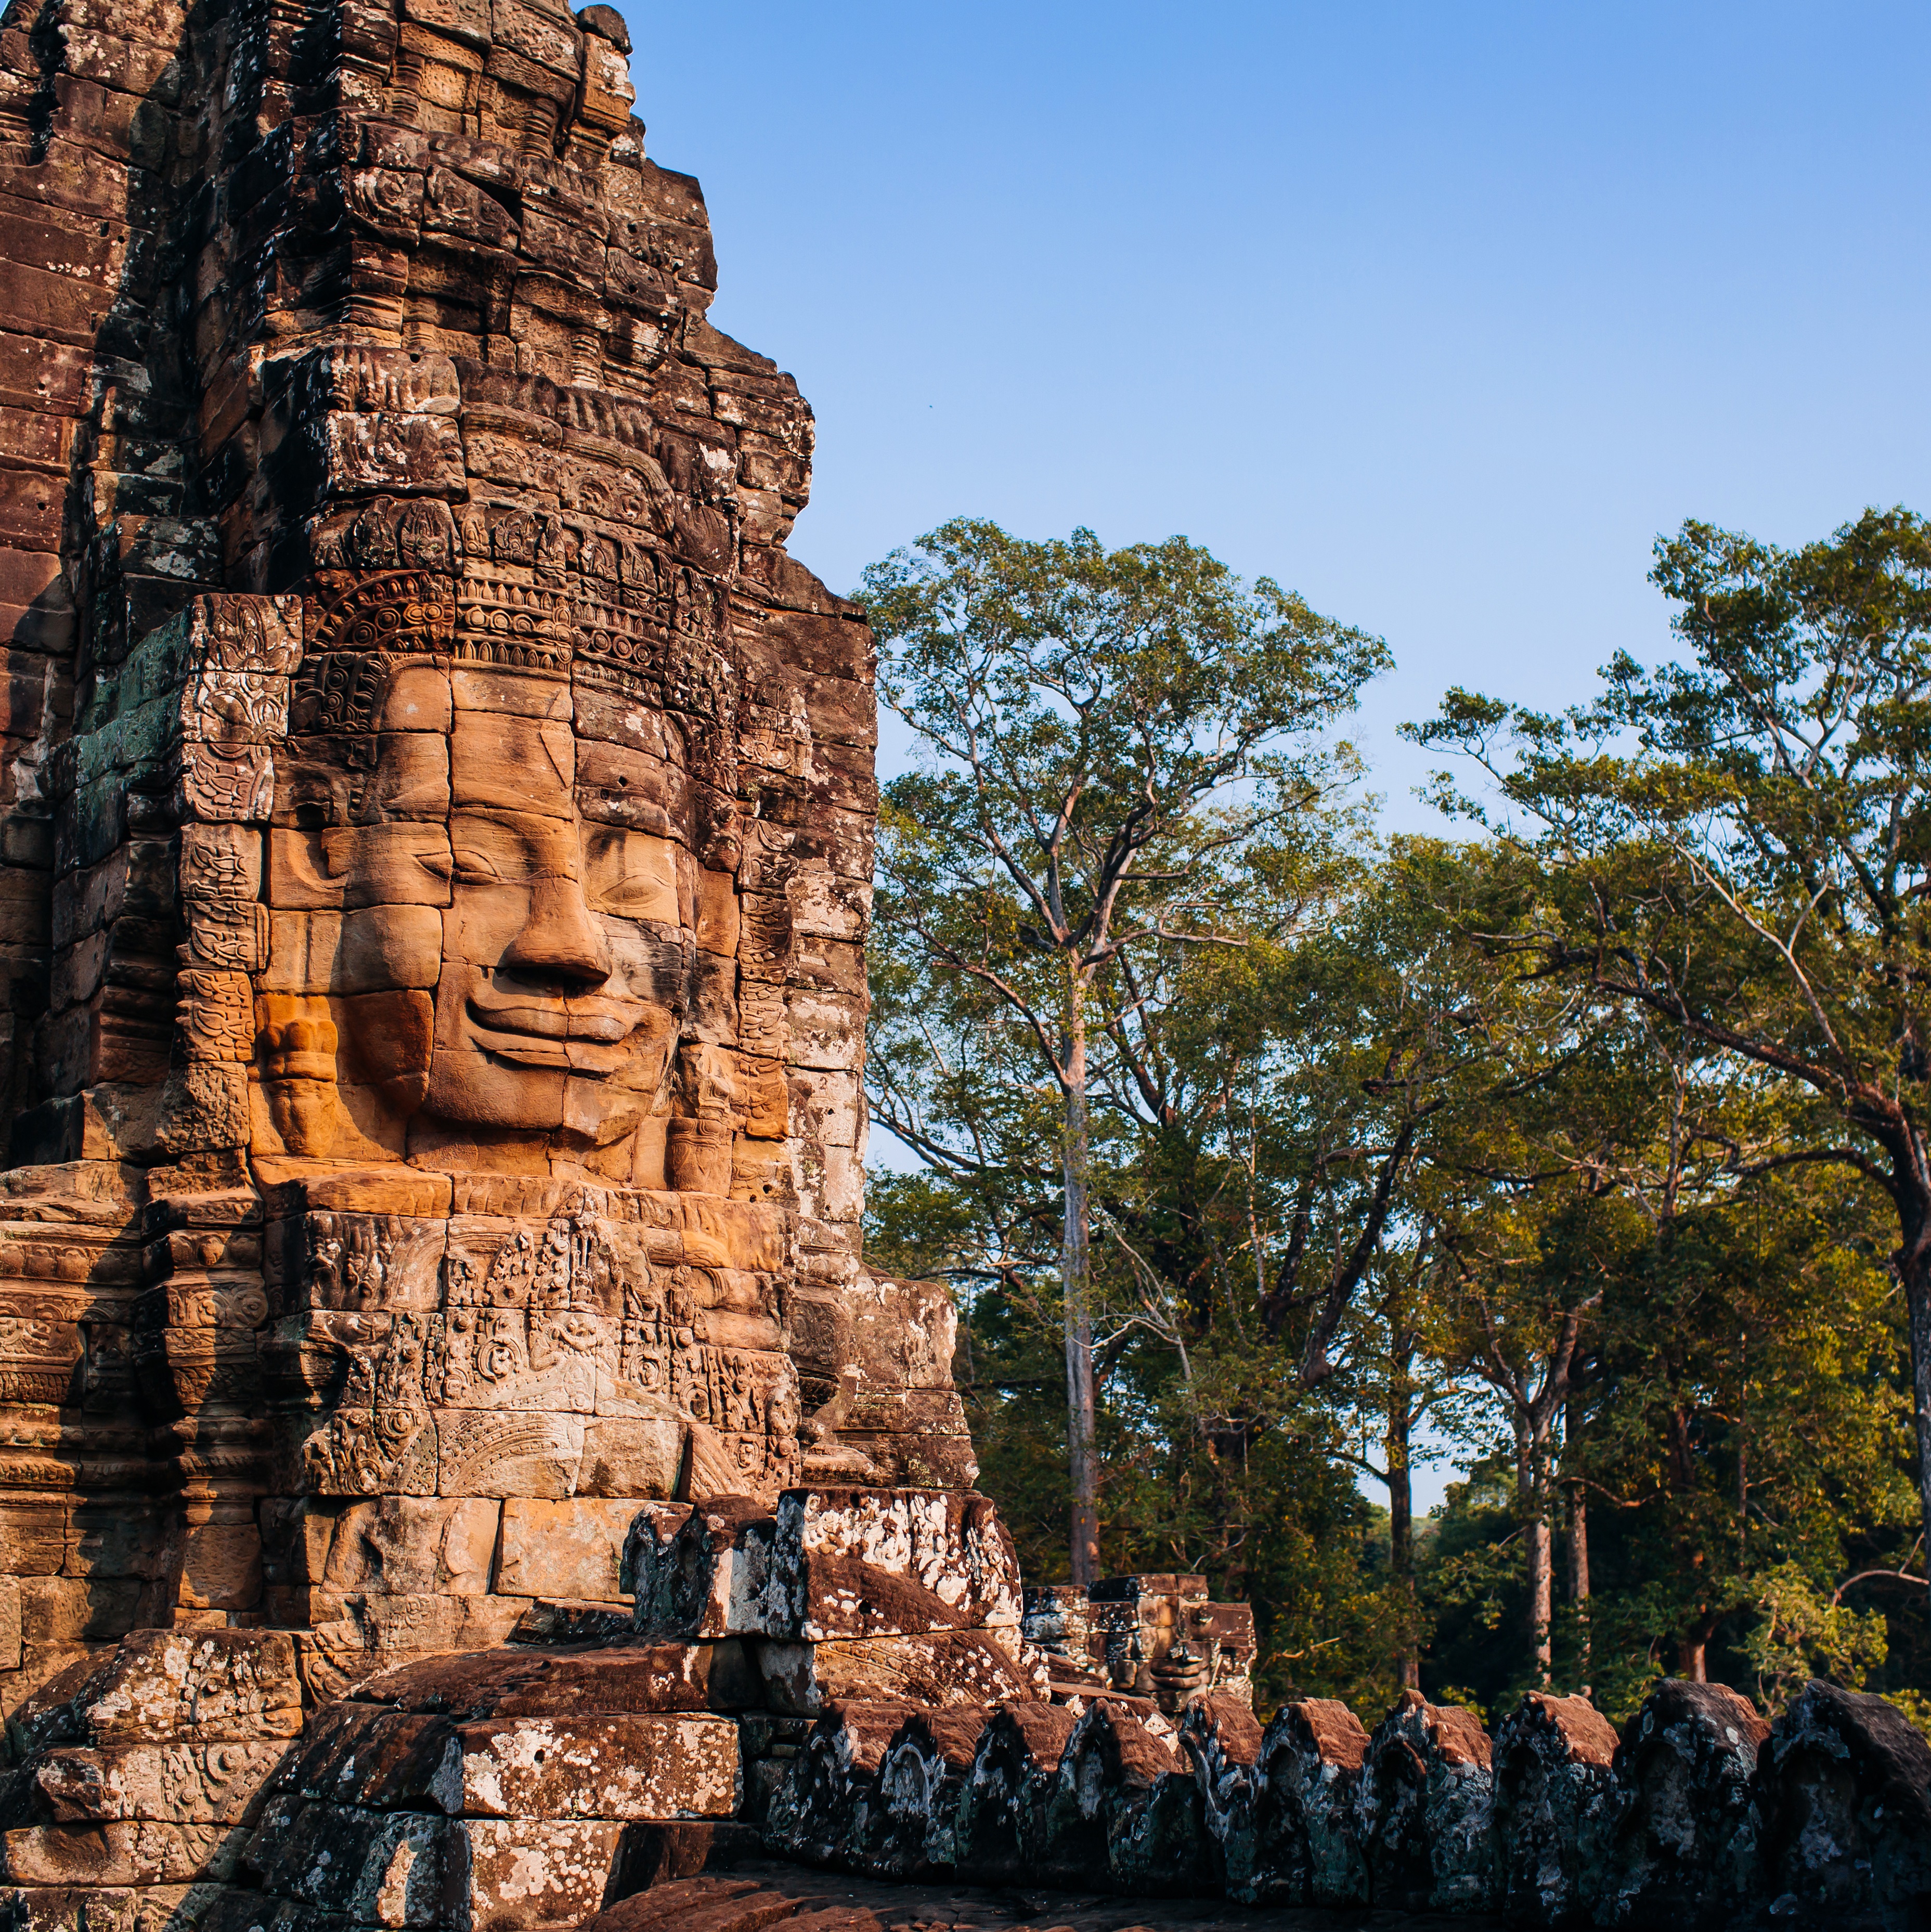 Exclusive Savings on Treasures of Cambodia with A&K